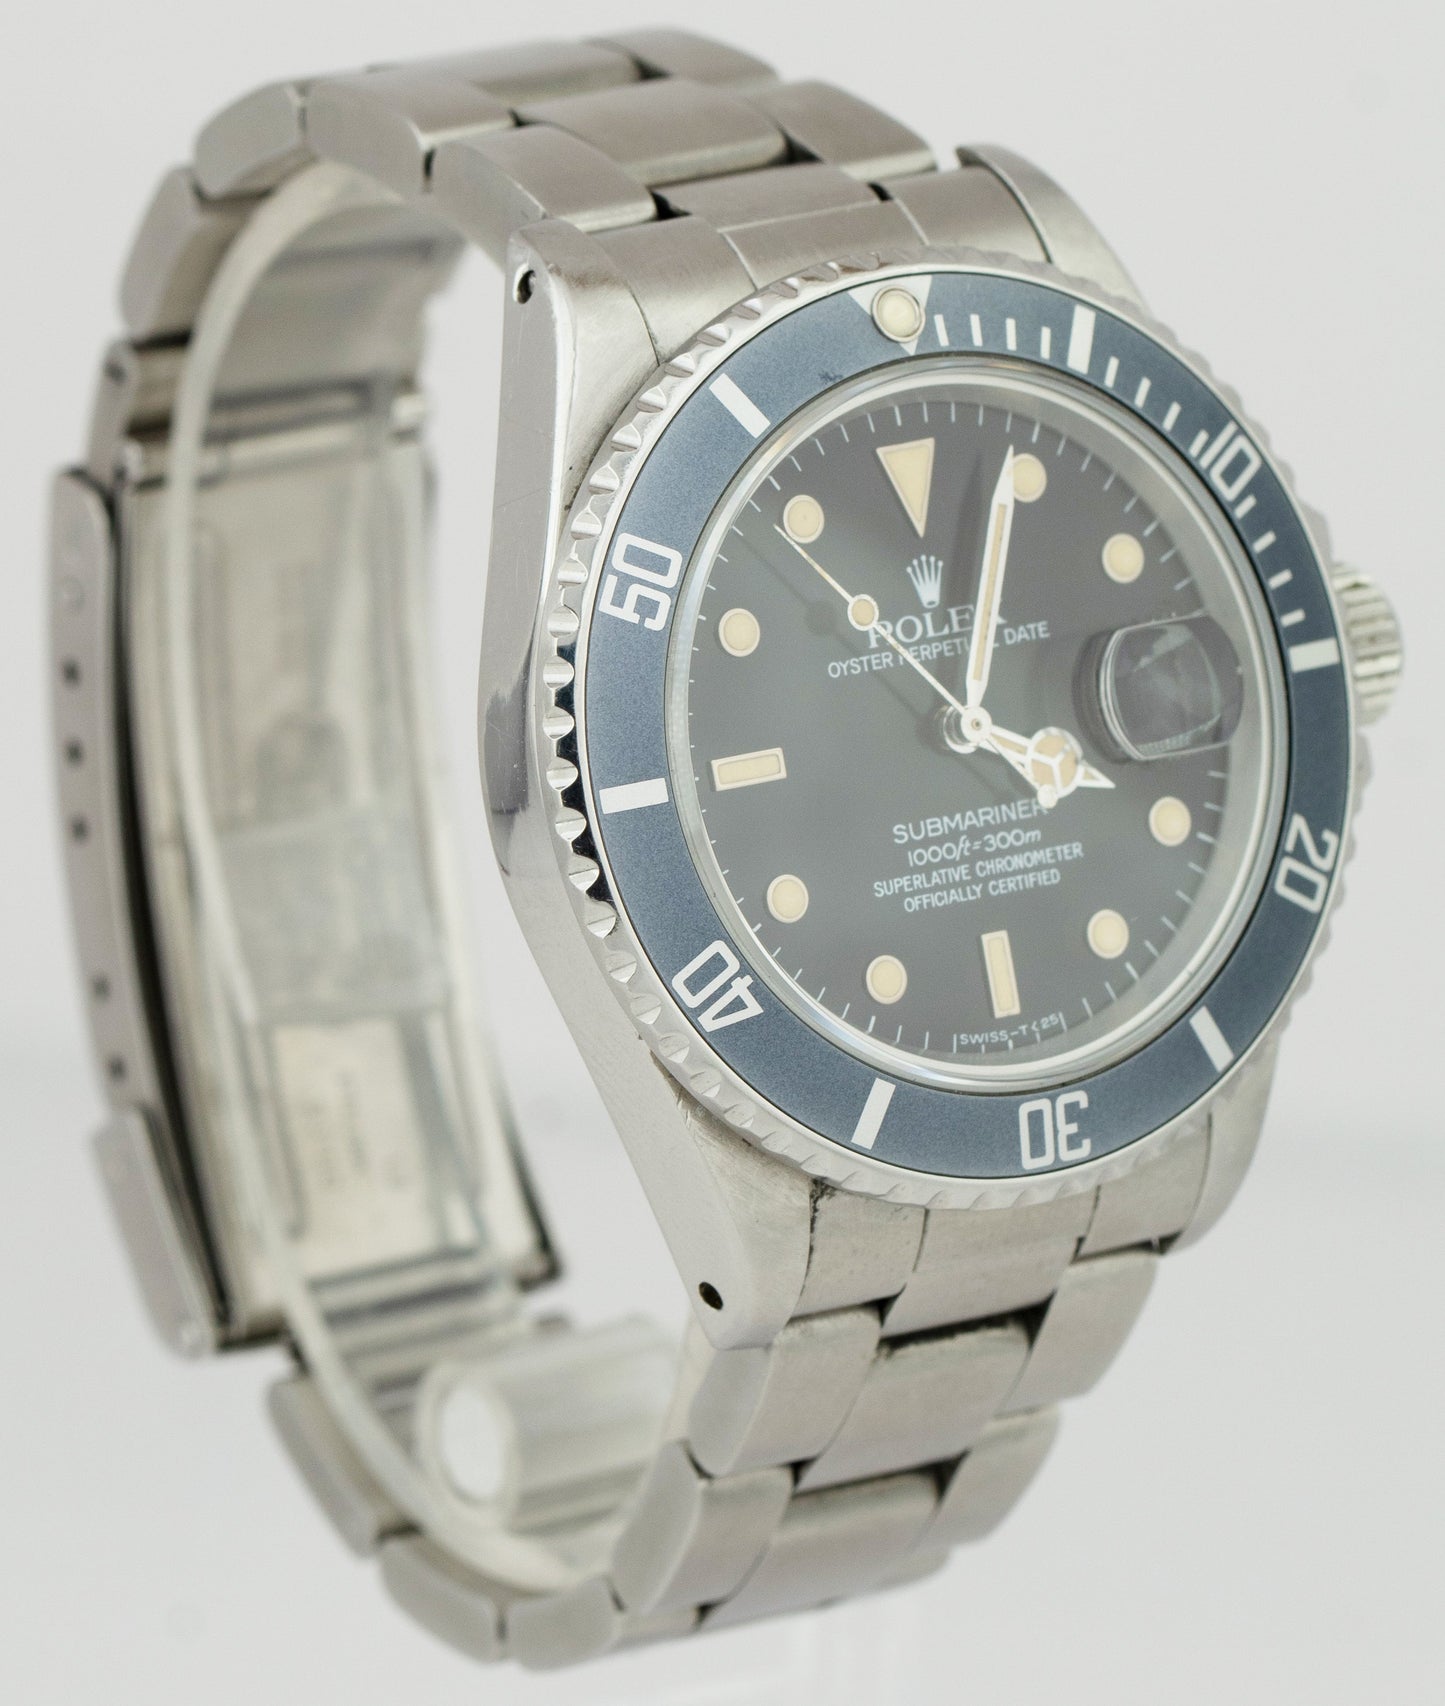 Rolex Submariner Date Stainless Steel 40mm Patina Oyster Watch 16800 BOX PAPERS